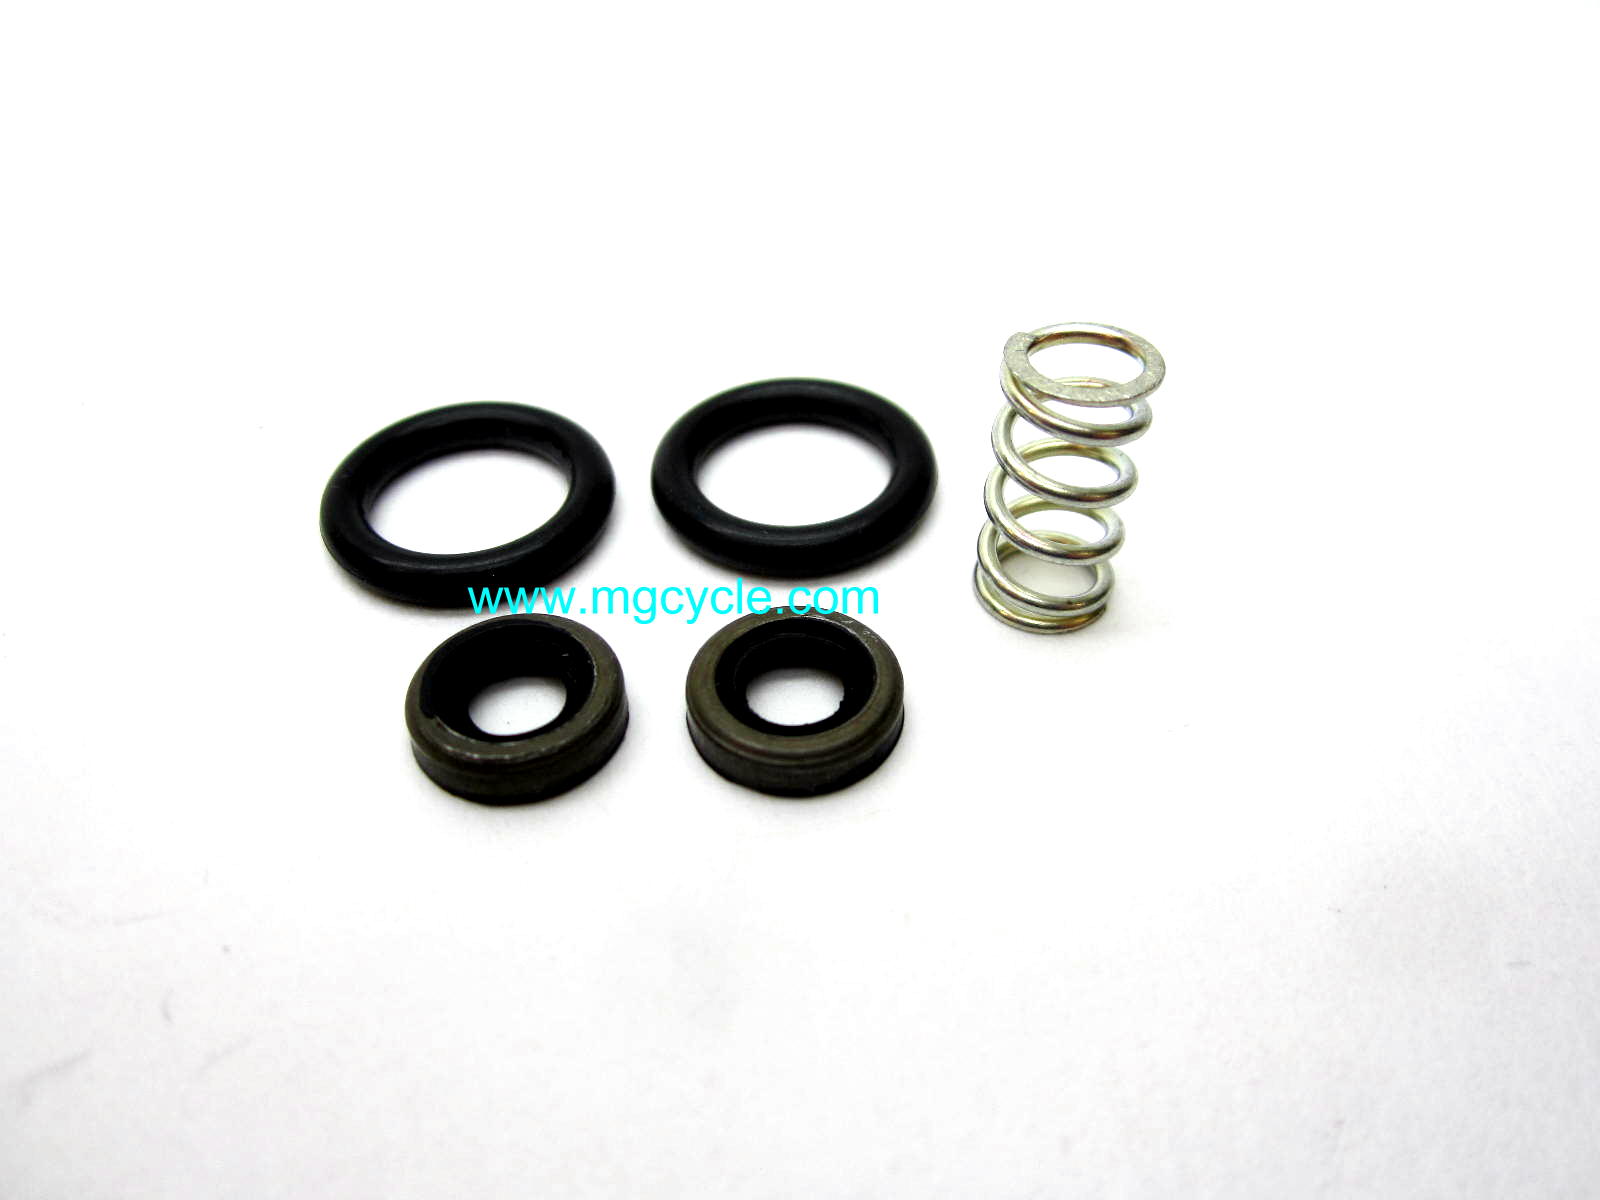 Repair kit: seals and orings kit for hydraulic clutch slave cyl - Click Image to Close